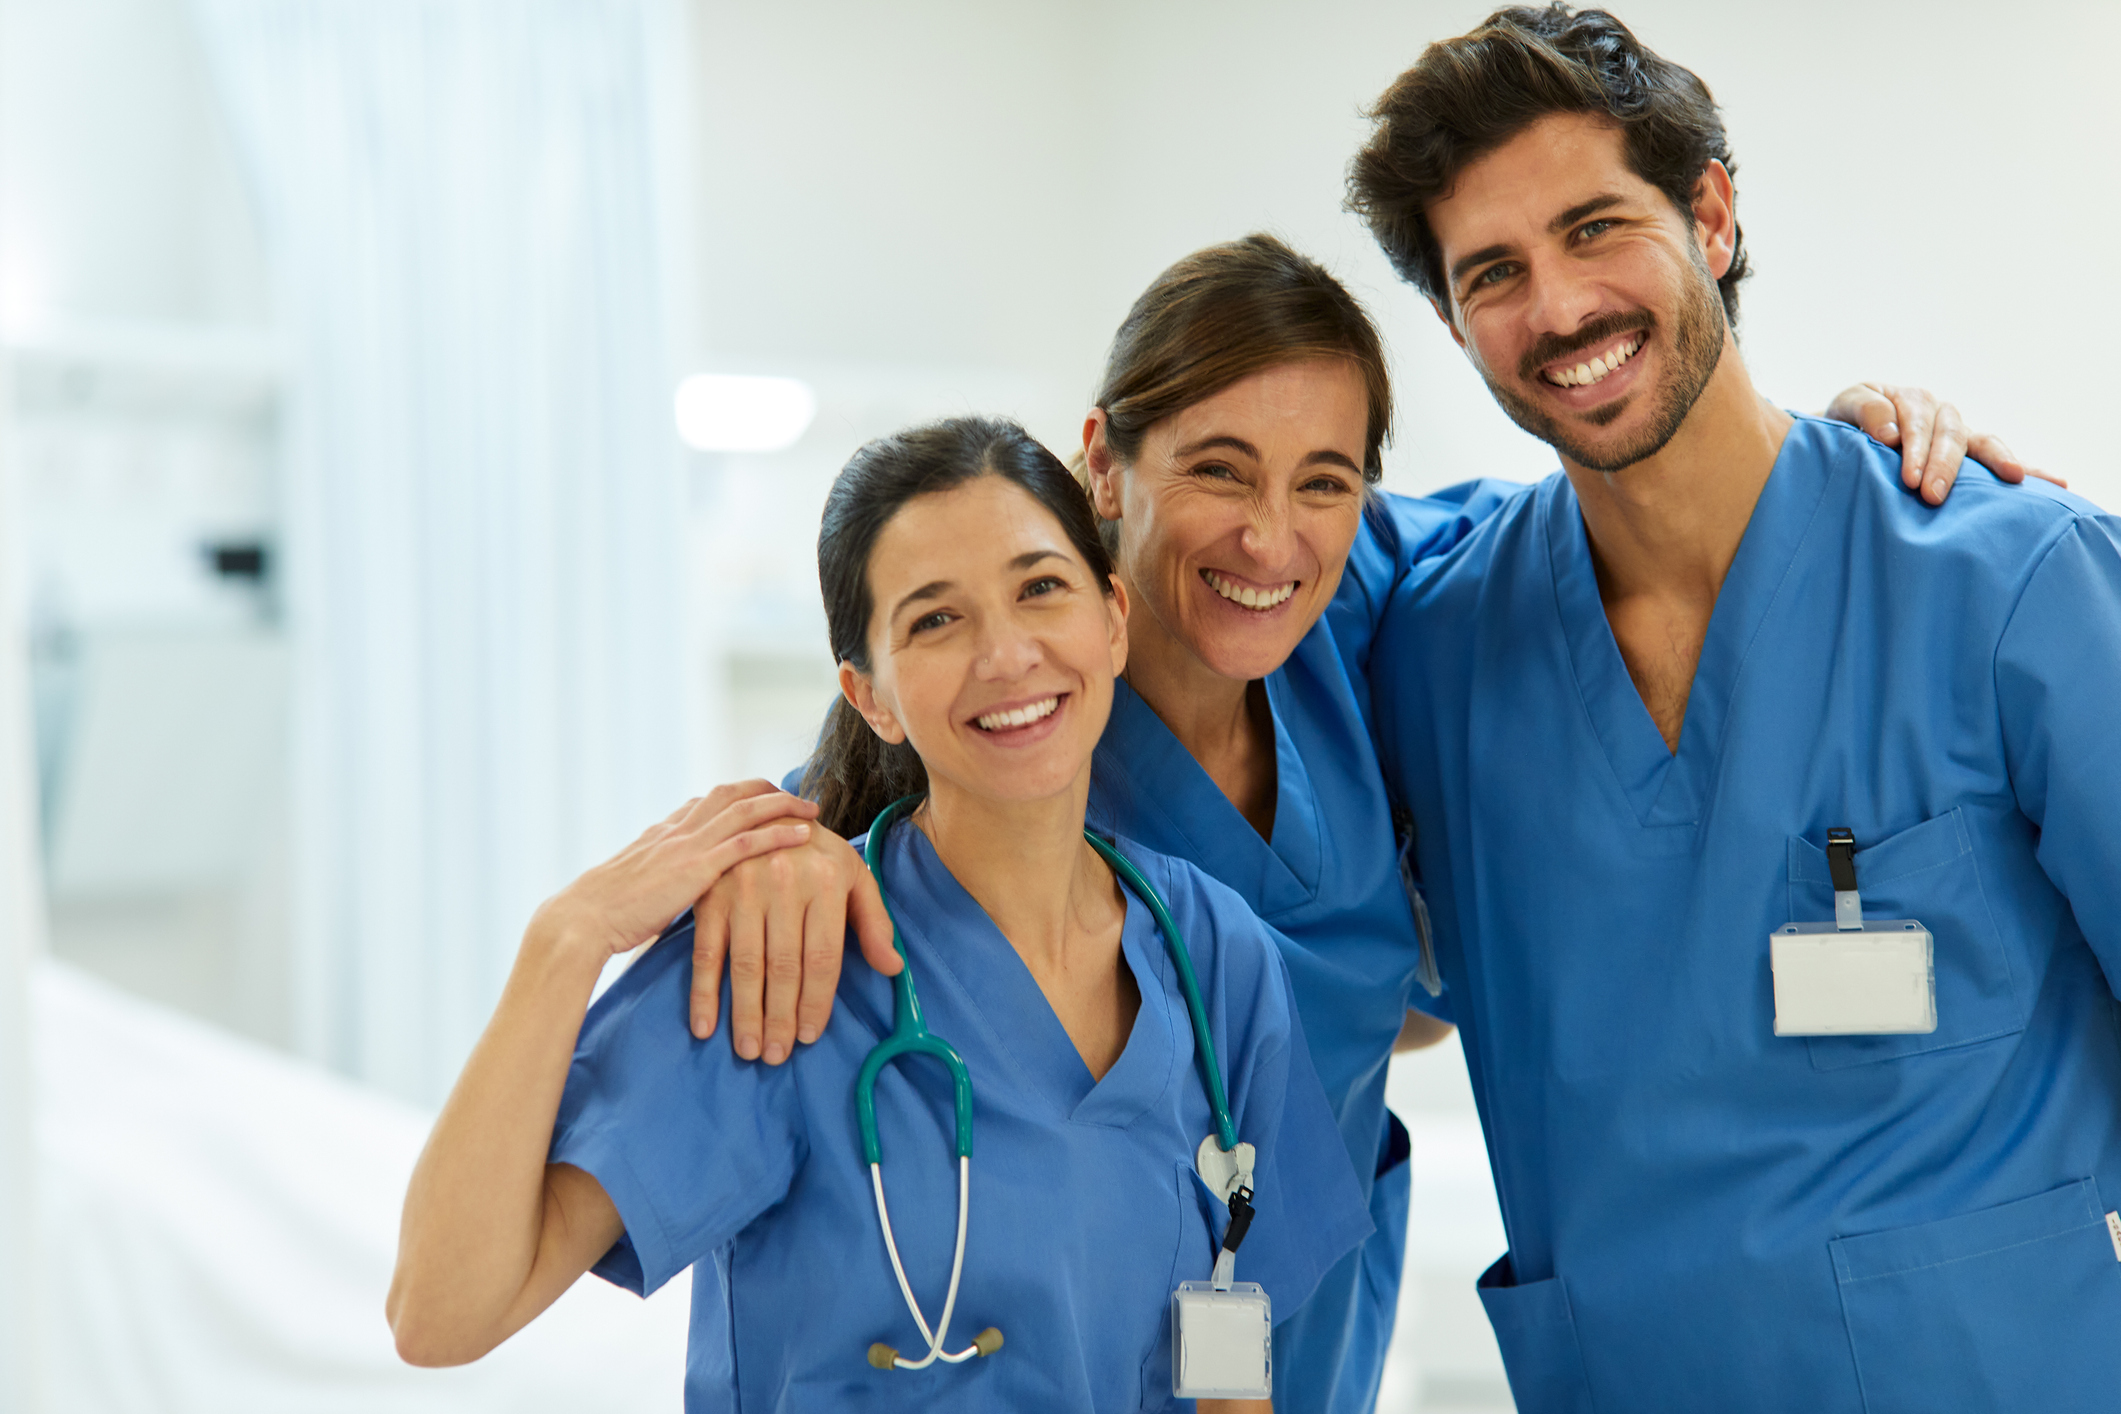 A trio of happy healthcare workers are grouped together posing for a photograph, they are on a hospital ward and wearing their blue scrubs